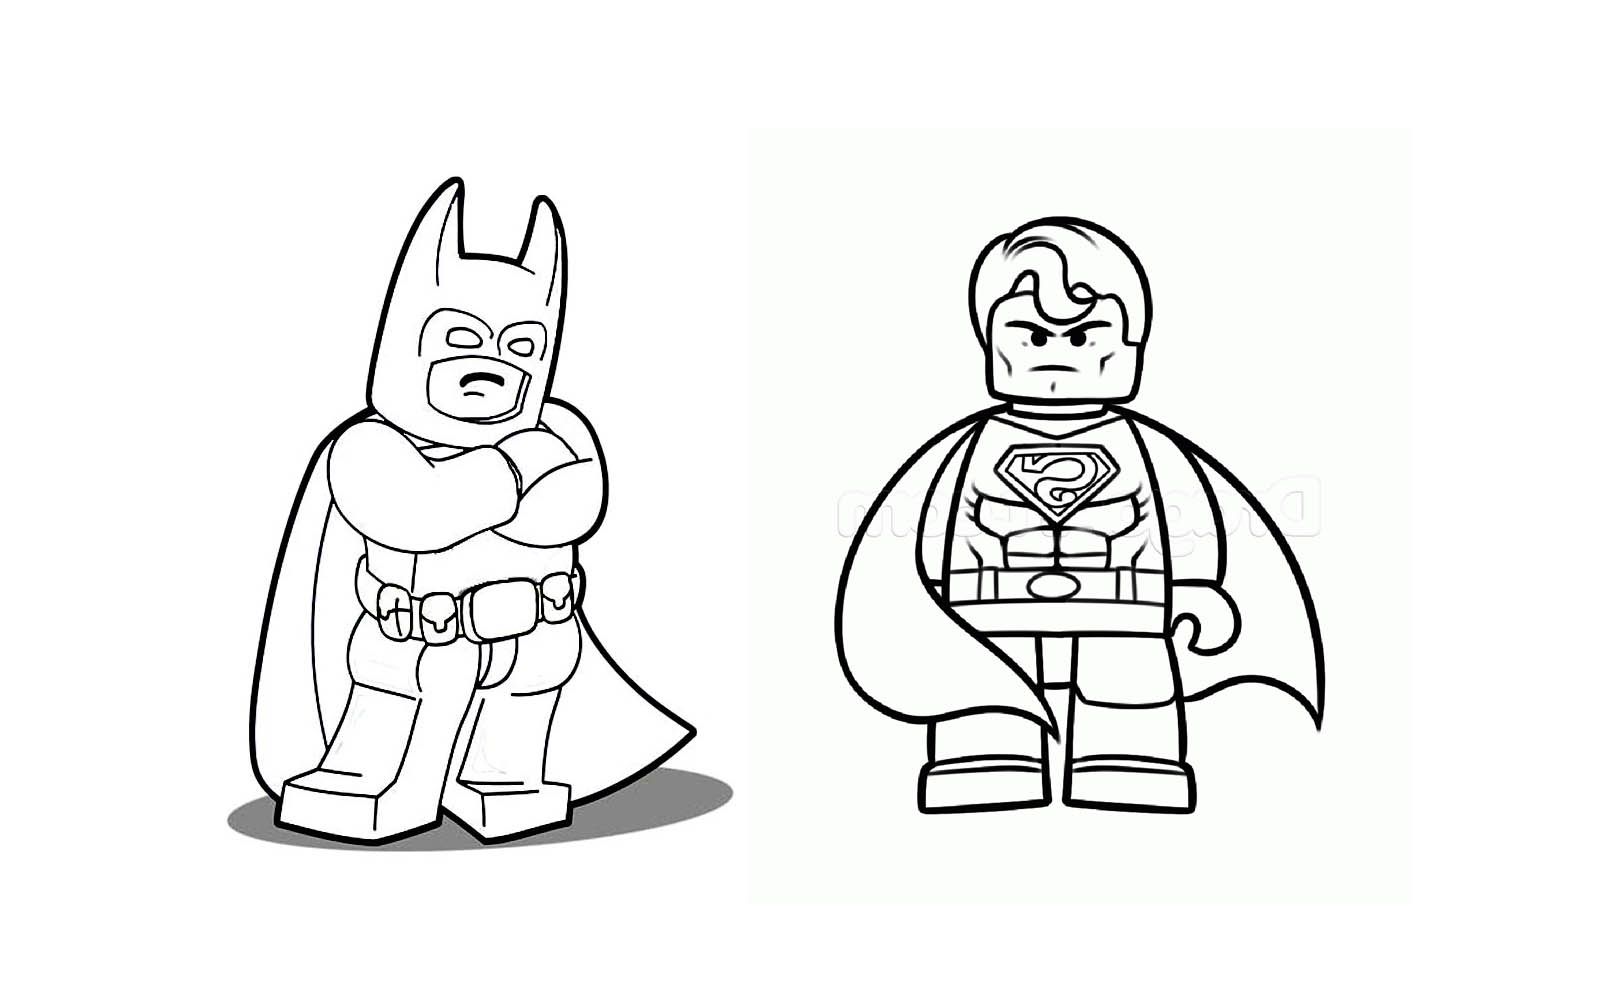 FREE Adult 46+ Superman Lego Coloring Sheet | Train Wagon Coloring Pages